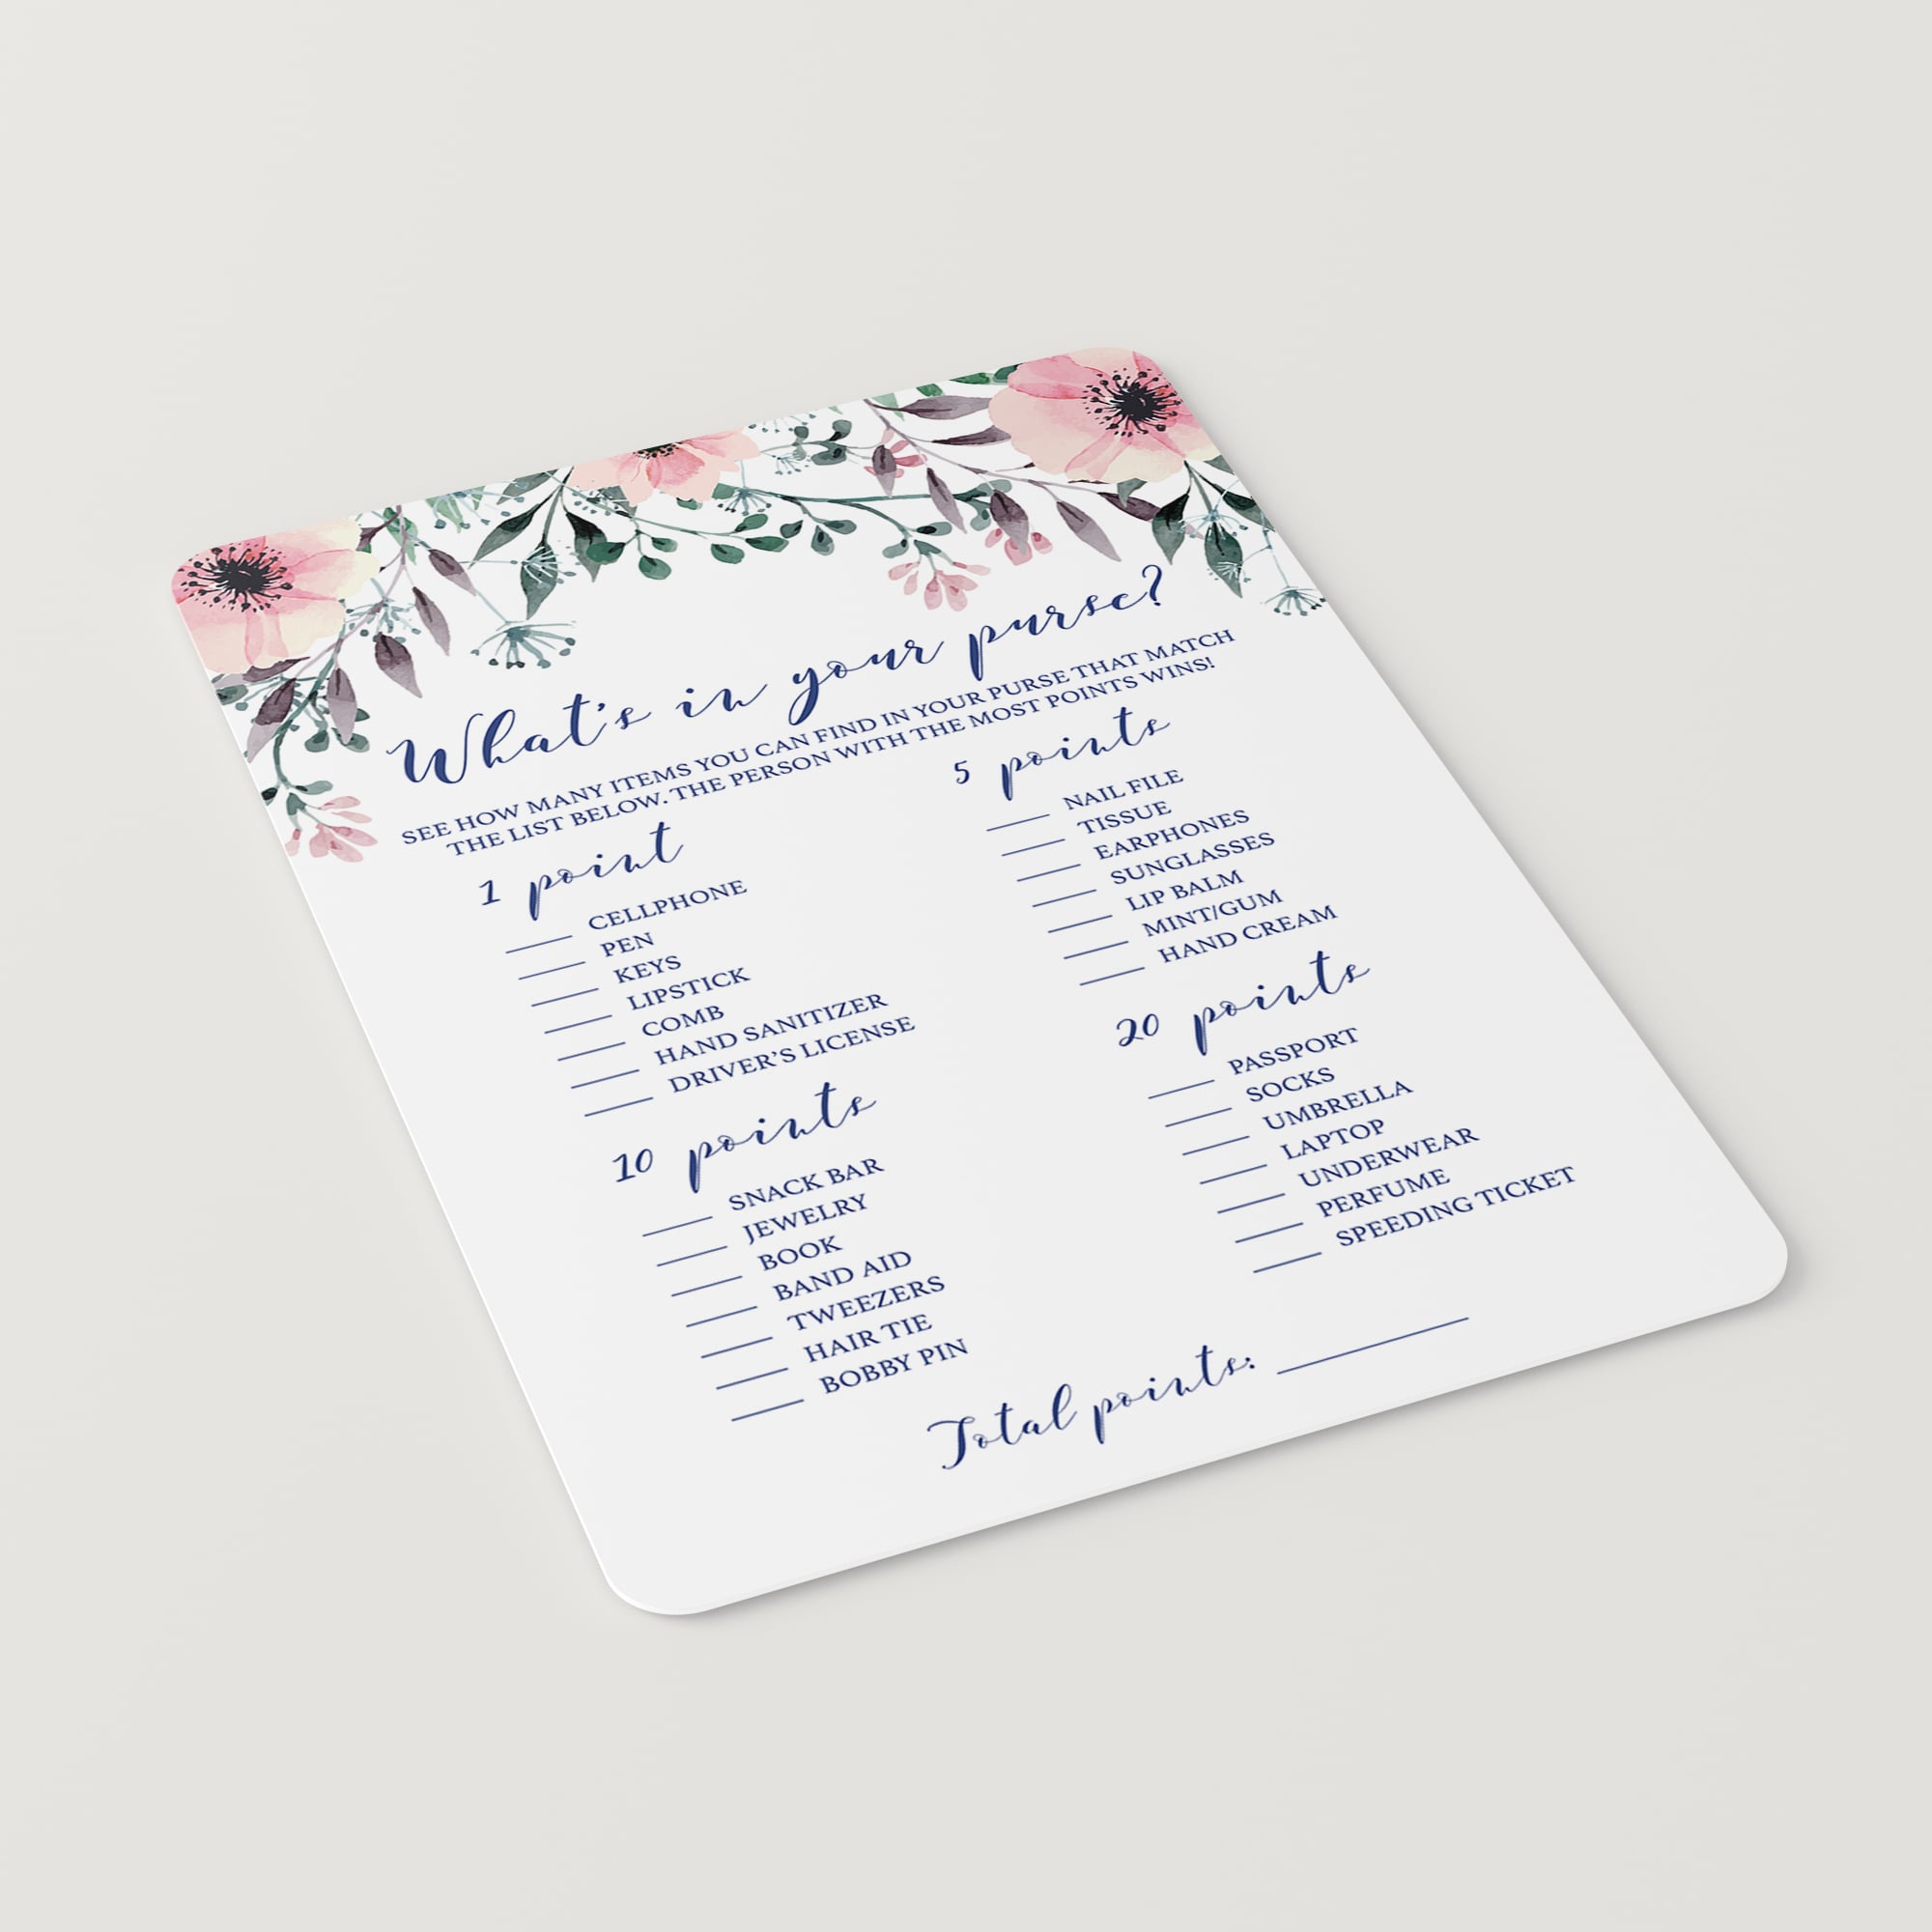 Watercolor pink flowers on a bridal shower game card 1c94e396 876d 4362 ae21 54e21a4877e8